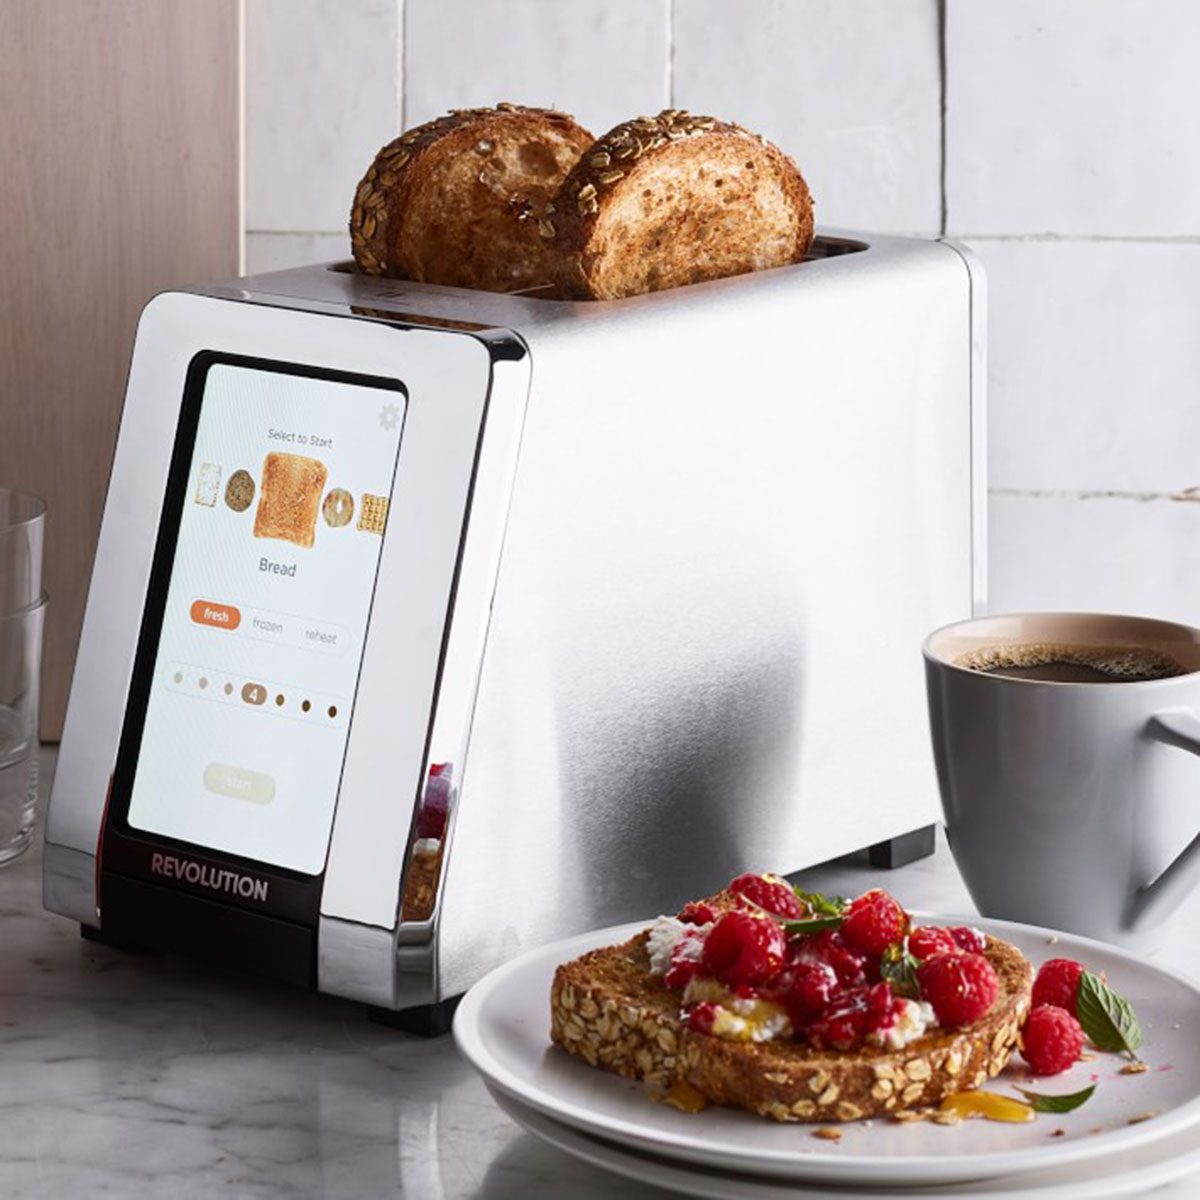 10 Smart Kitchen Gadgets Every Homeowner Needs to Have